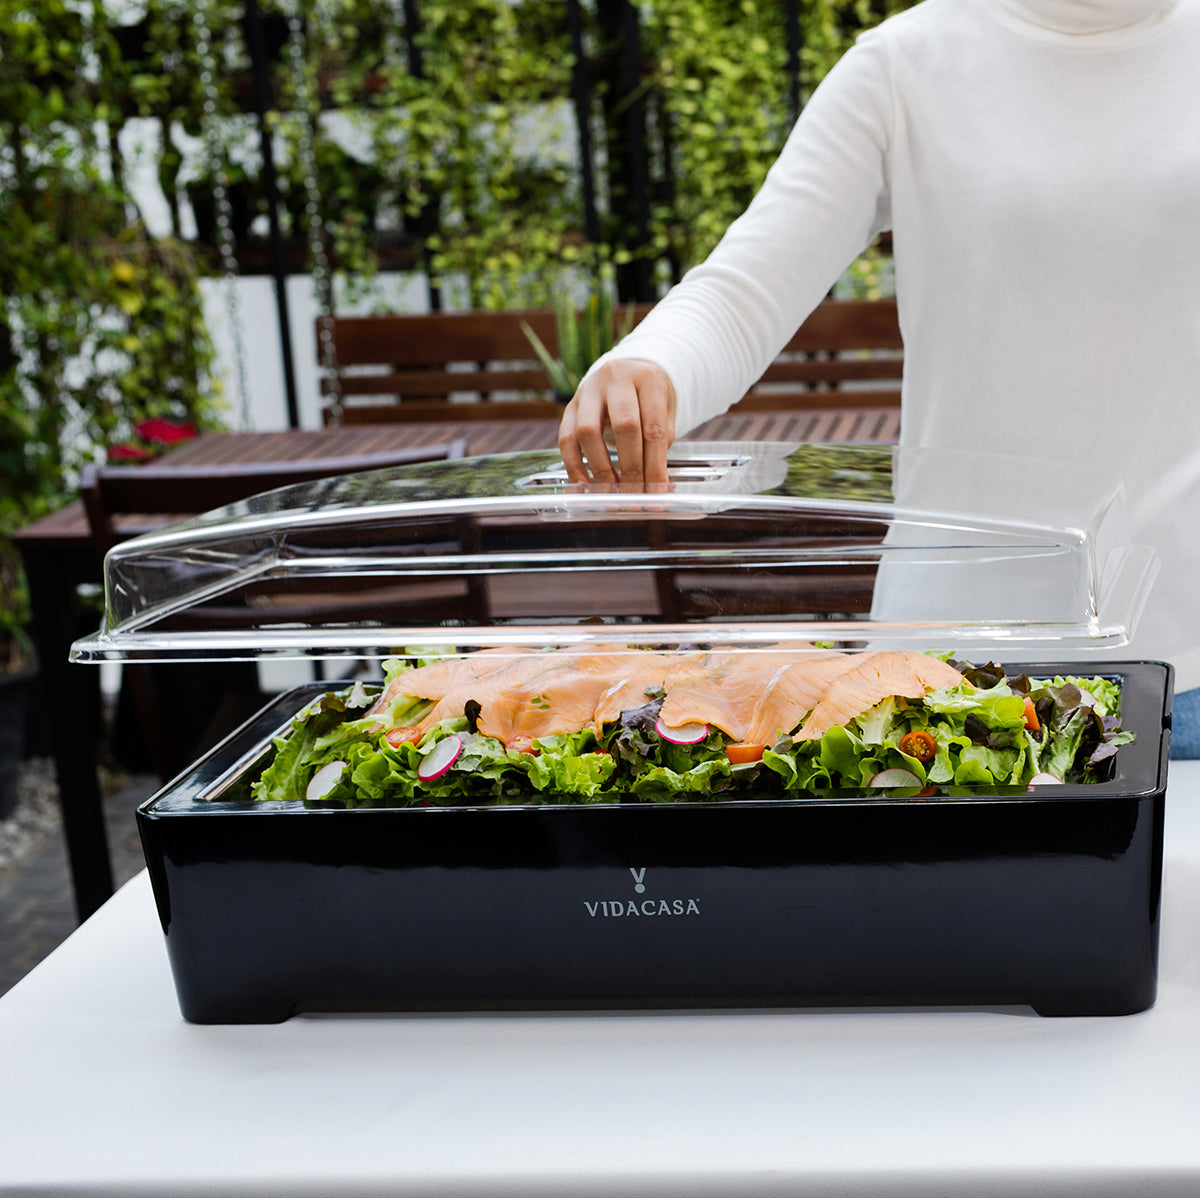 Vidacasa® Classic T605 Rectangular is the world’s first buffetware equipment that can maintain cold foods chilled at 4ºC (39ºF) without ice; Maintain cooked foods hot at 80ºC (176ºF) for hours without dangling cords or chafing fuels.